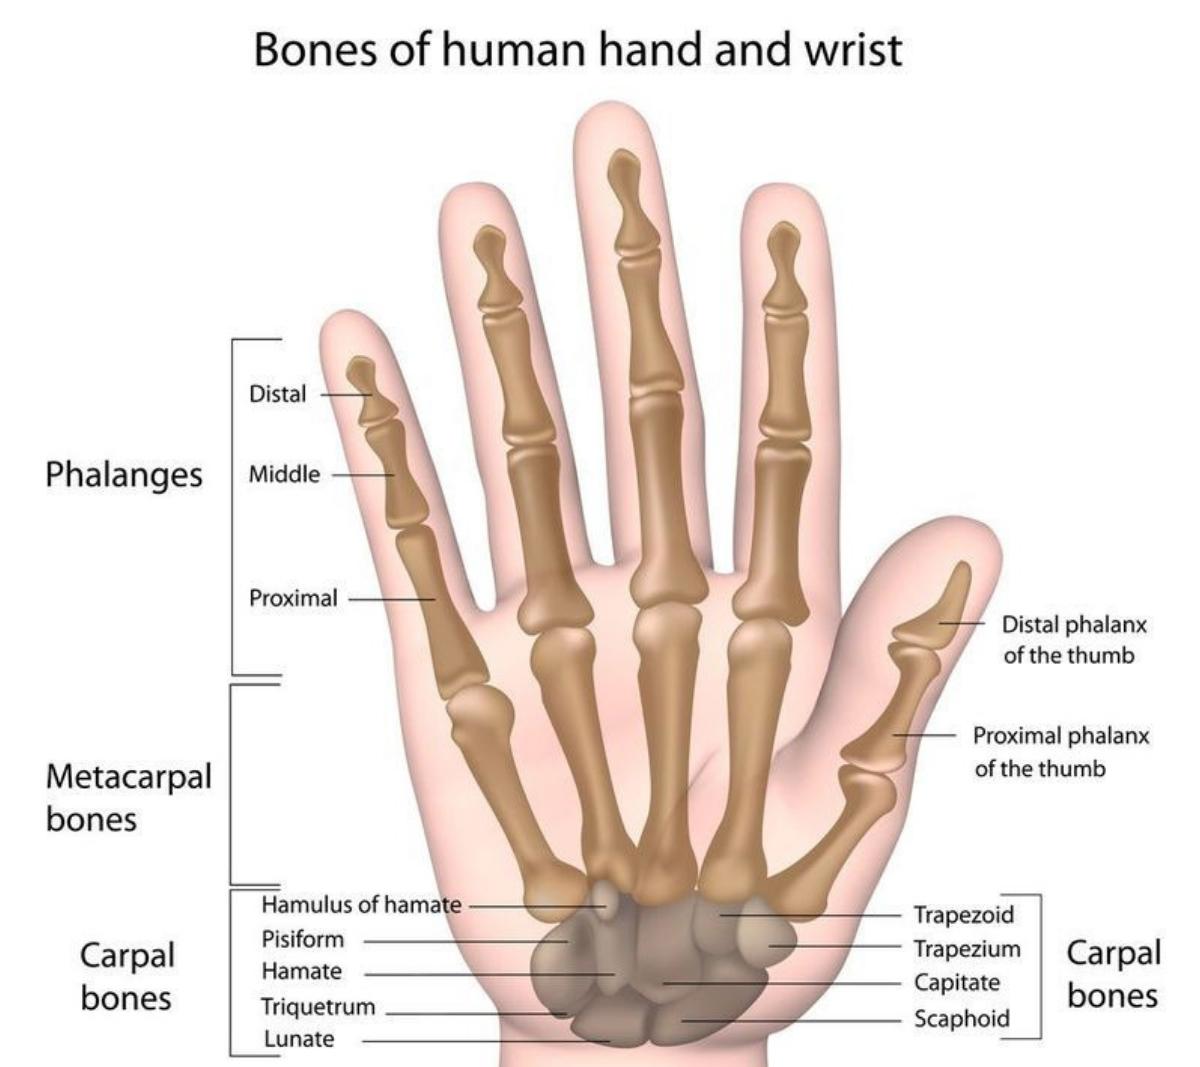 Hand fractures , broken hands, hand doctors, hand fracture care, hand fracture treatment, causes of hand fractures, hand surgeons,physical therapy services in Kenya,day care surgery services in Kenya, Nairobi spine and orthopedic centre in Kenya, Orthopedic surgeons in Kenya, trauma surgeon in Kenya, spine surgeon, back pain treatment, neck pain care in Kenya, pain management services in Kenya, pediatric orthopedics in Nairobi, emergency orthopedic services in Kenya